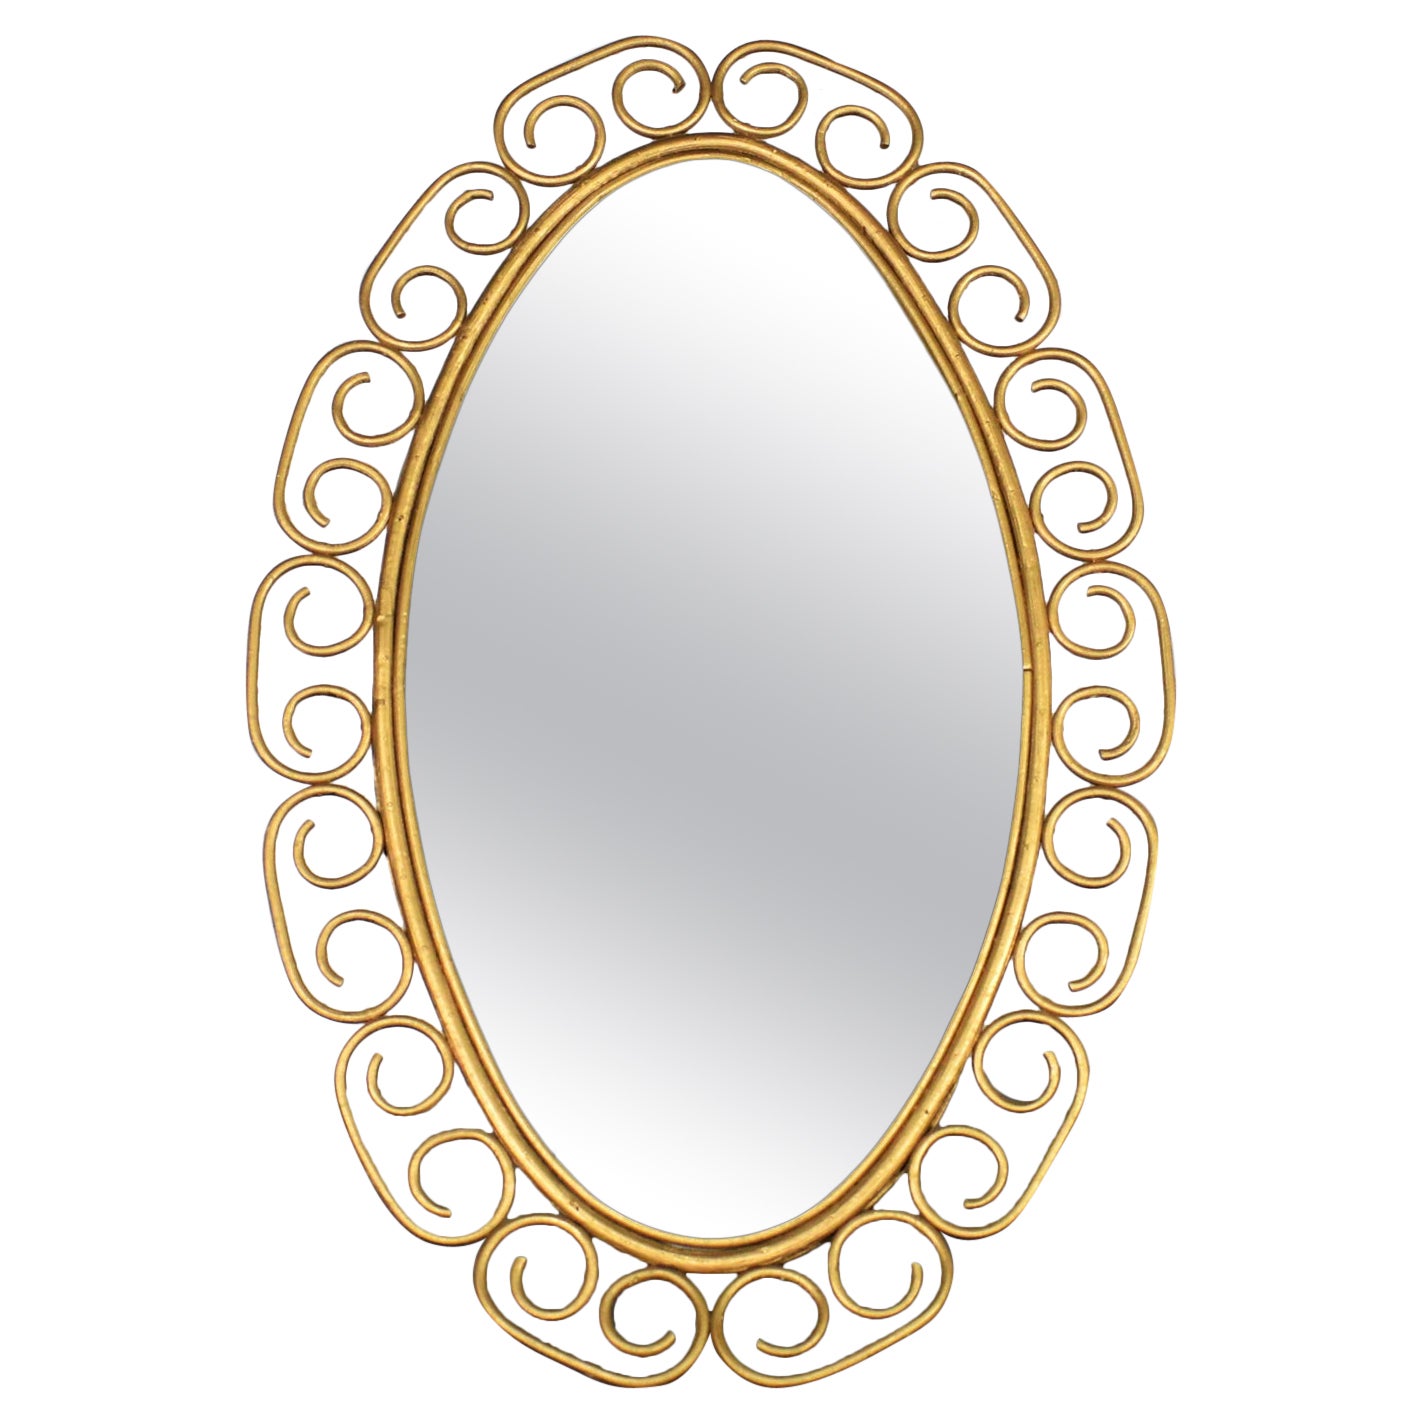 1960-1970’s Hollywood Regency Bohemian Free Standing Mirror Gold Painted Wicker  For Sale